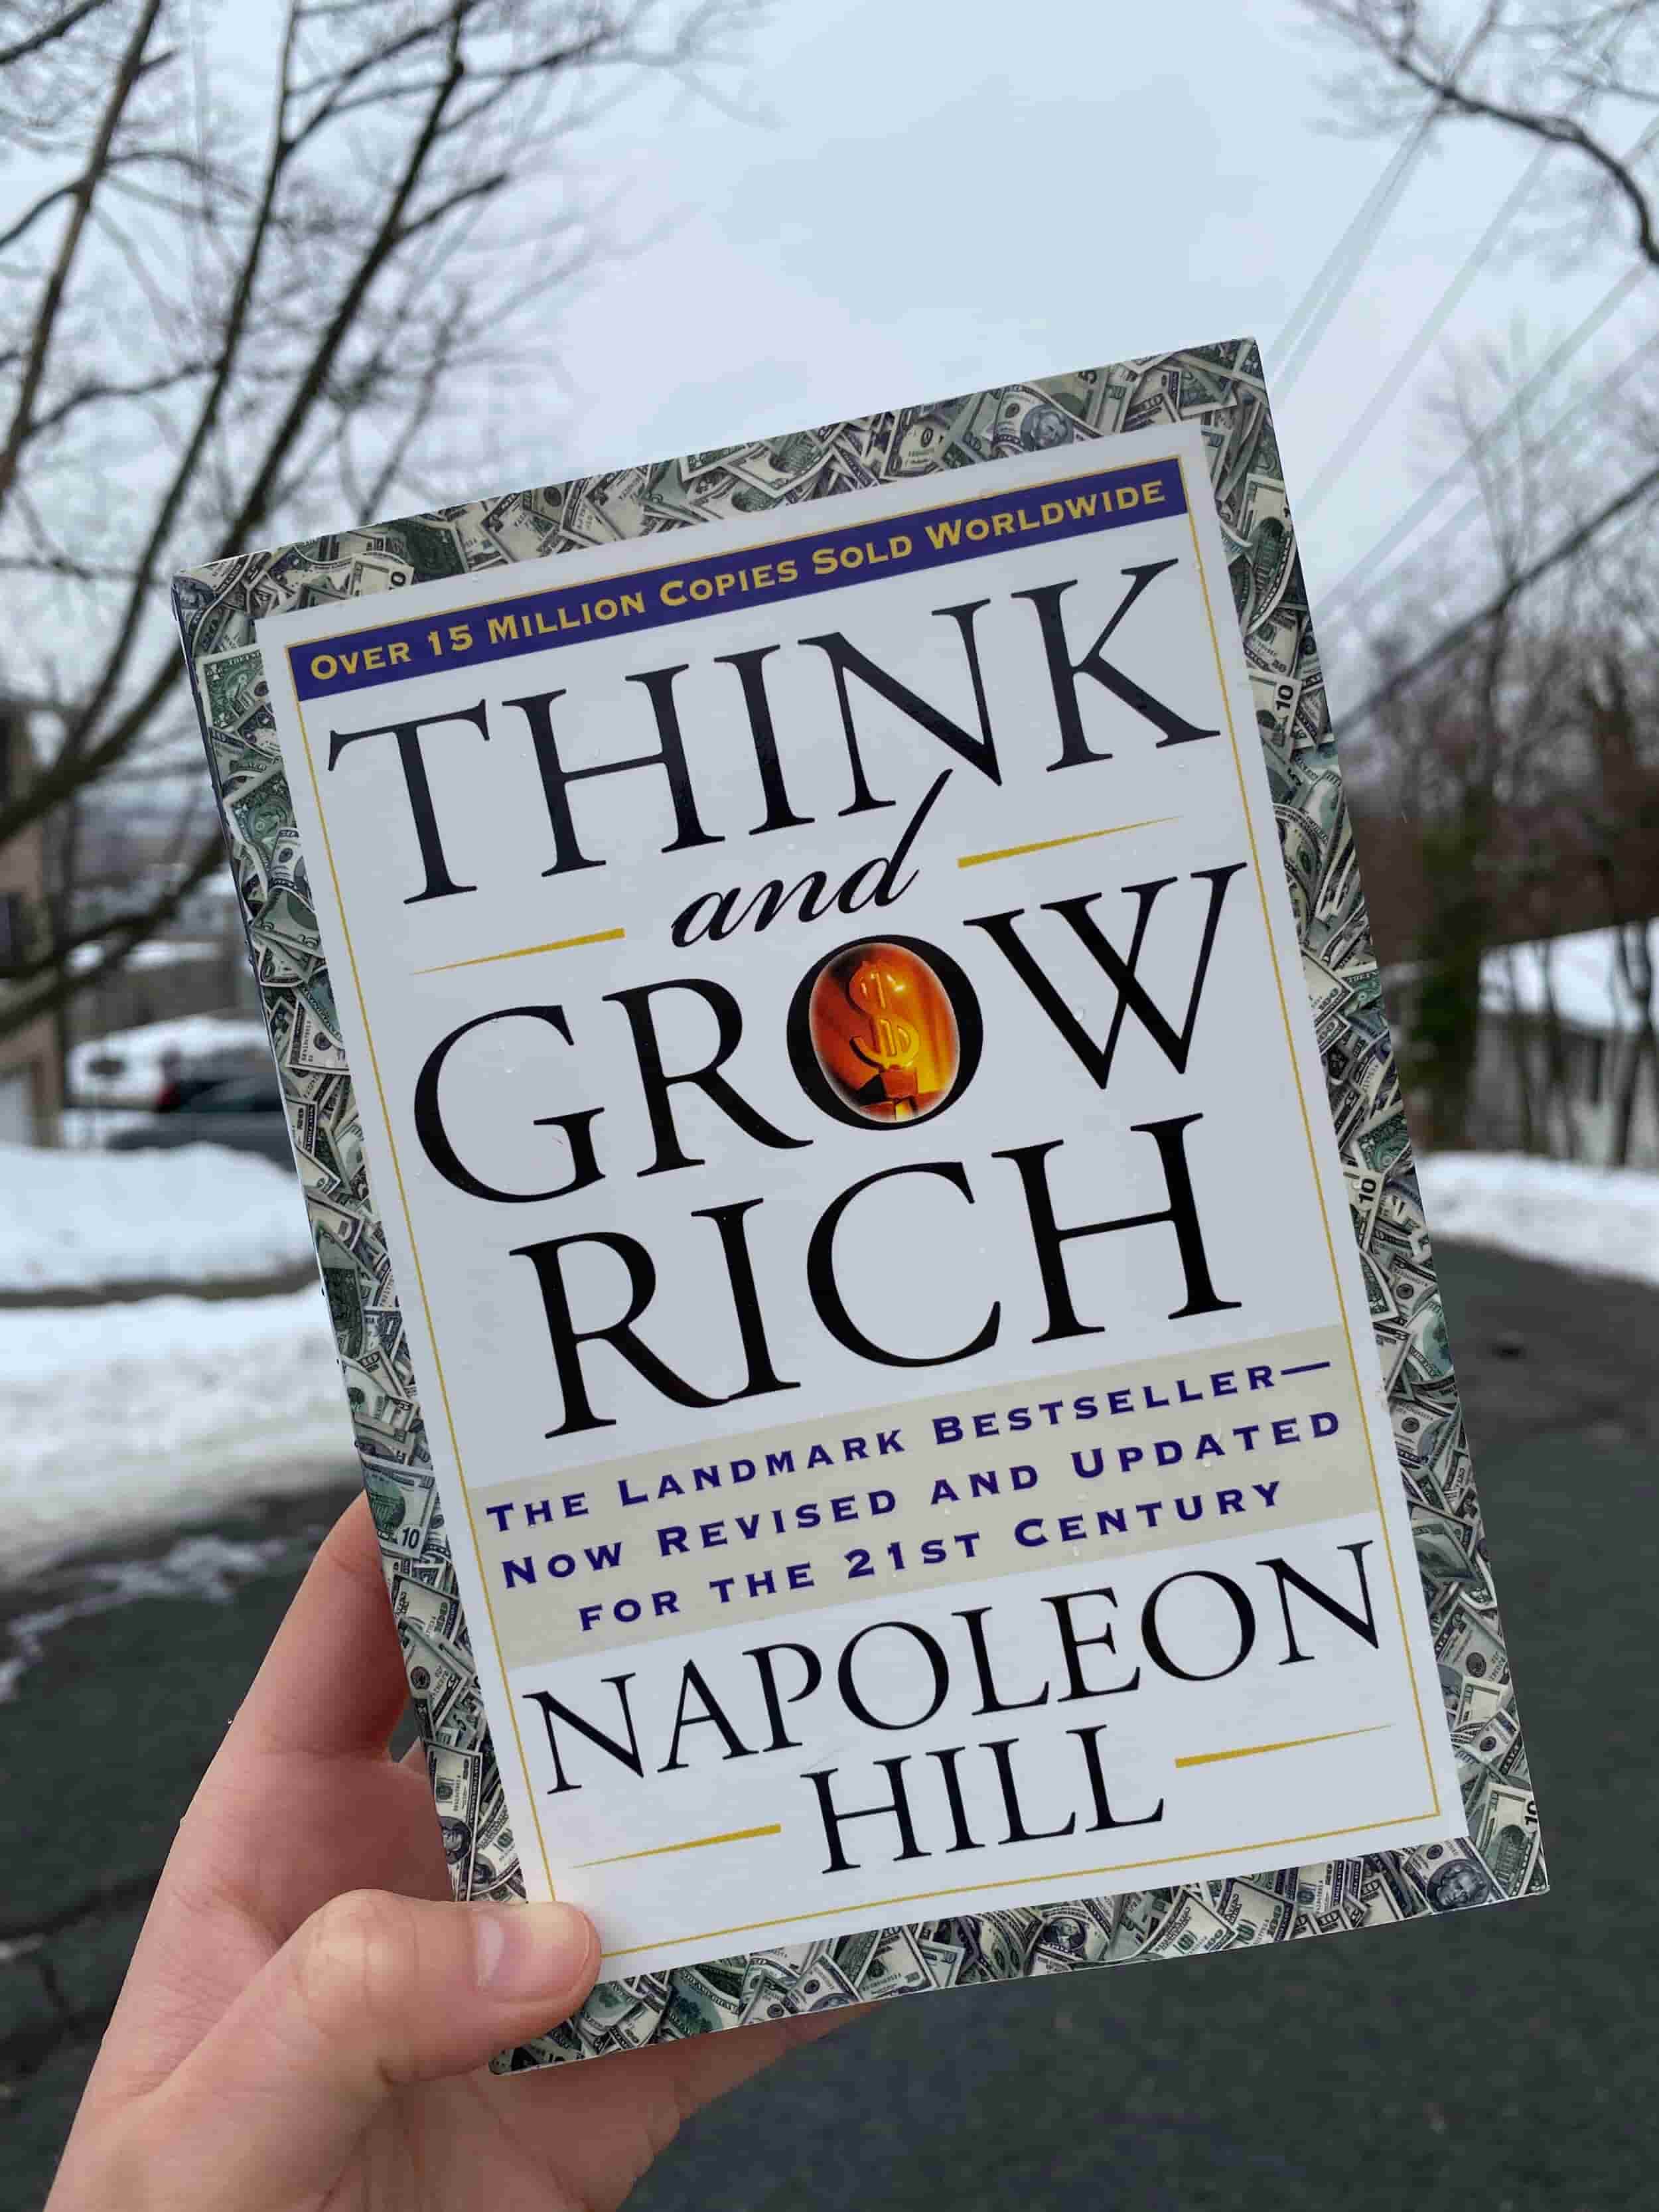 think and grow rich.jpg